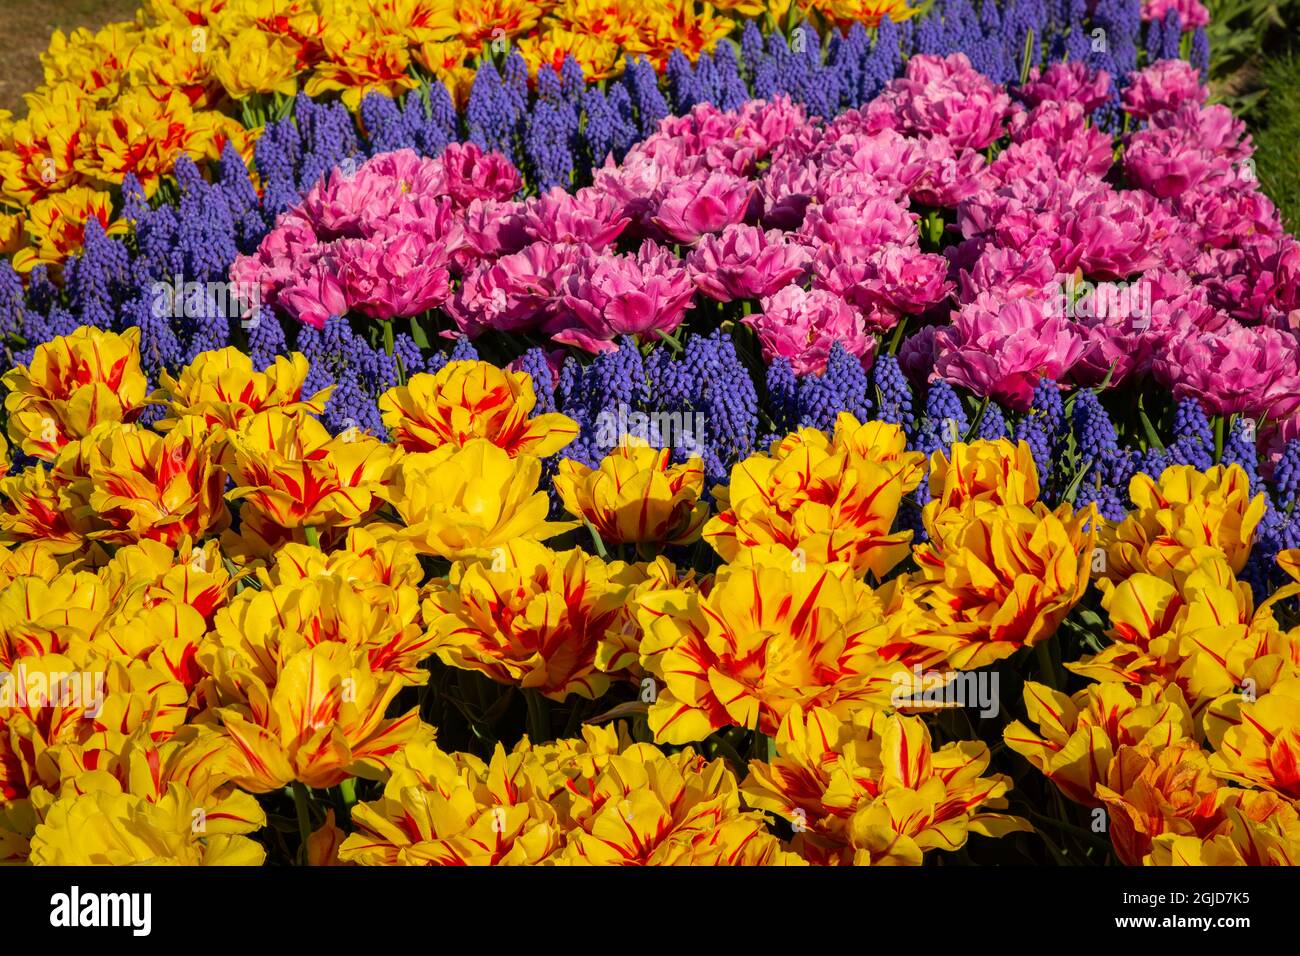 WA19616-00...WASHINGTON - Compound tulips and hyacinthus in a demonstration garden at Roozengaarde bulb growers. Stock Photo